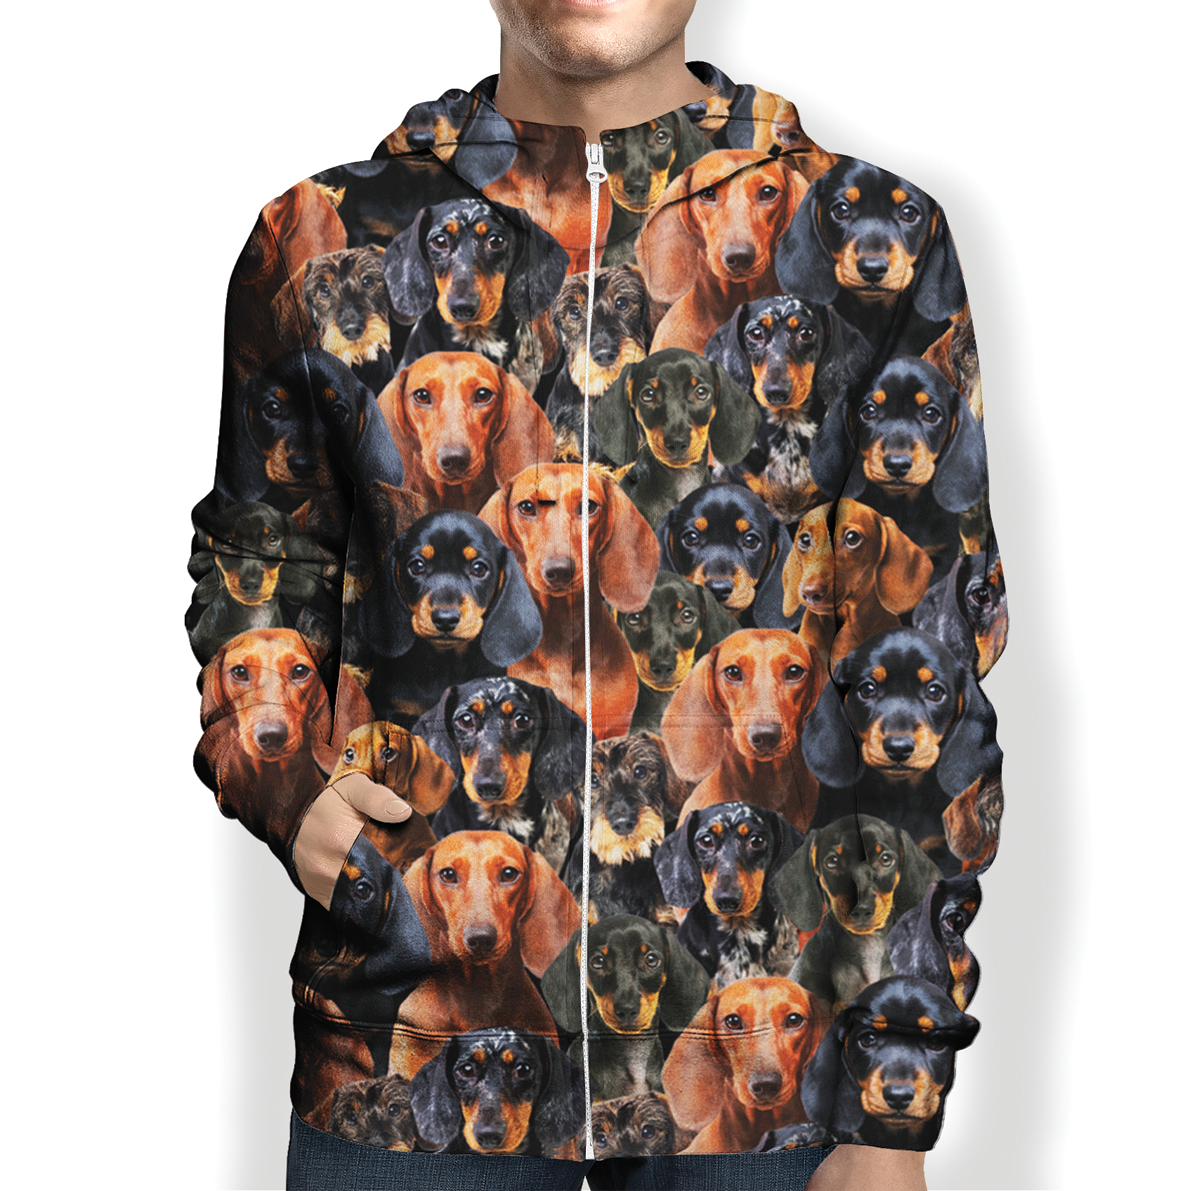 You Will Have A Bunch Of Dachshunds- Hoodie V1